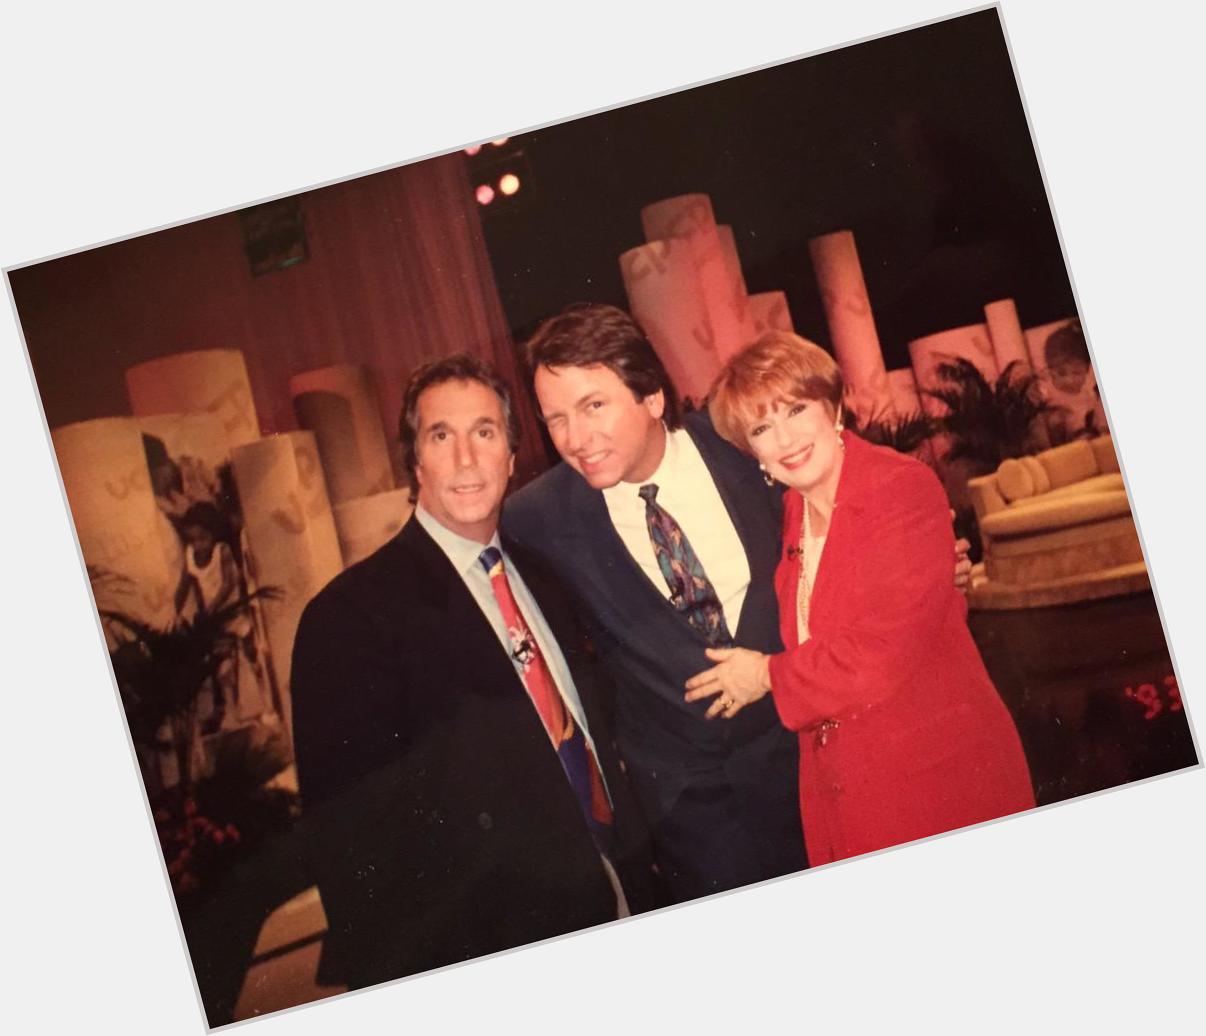 TBT- from the 1993 United Cerebral Palsy Telethon. Happy 67th birthday to the late John Ritter who is still missed. 